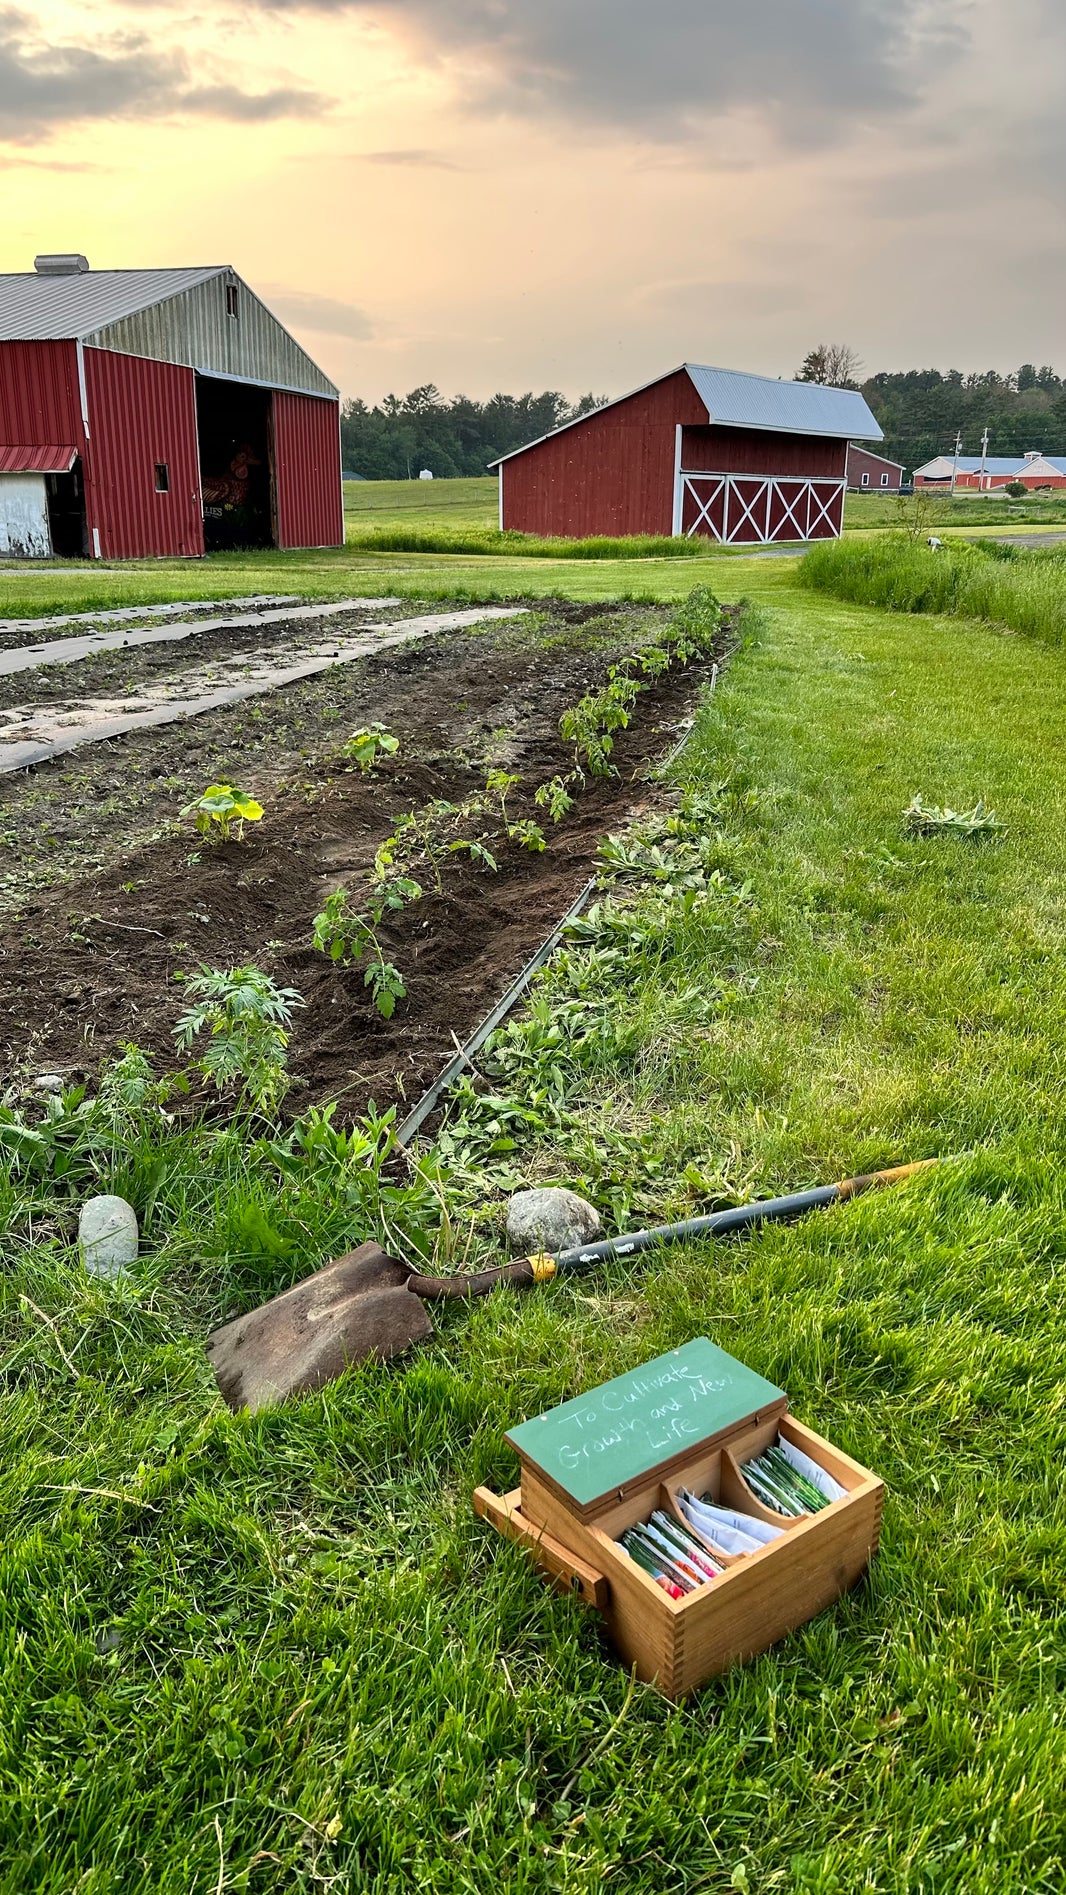 A shovel by a tilled patch of earth. There are two barns in the background